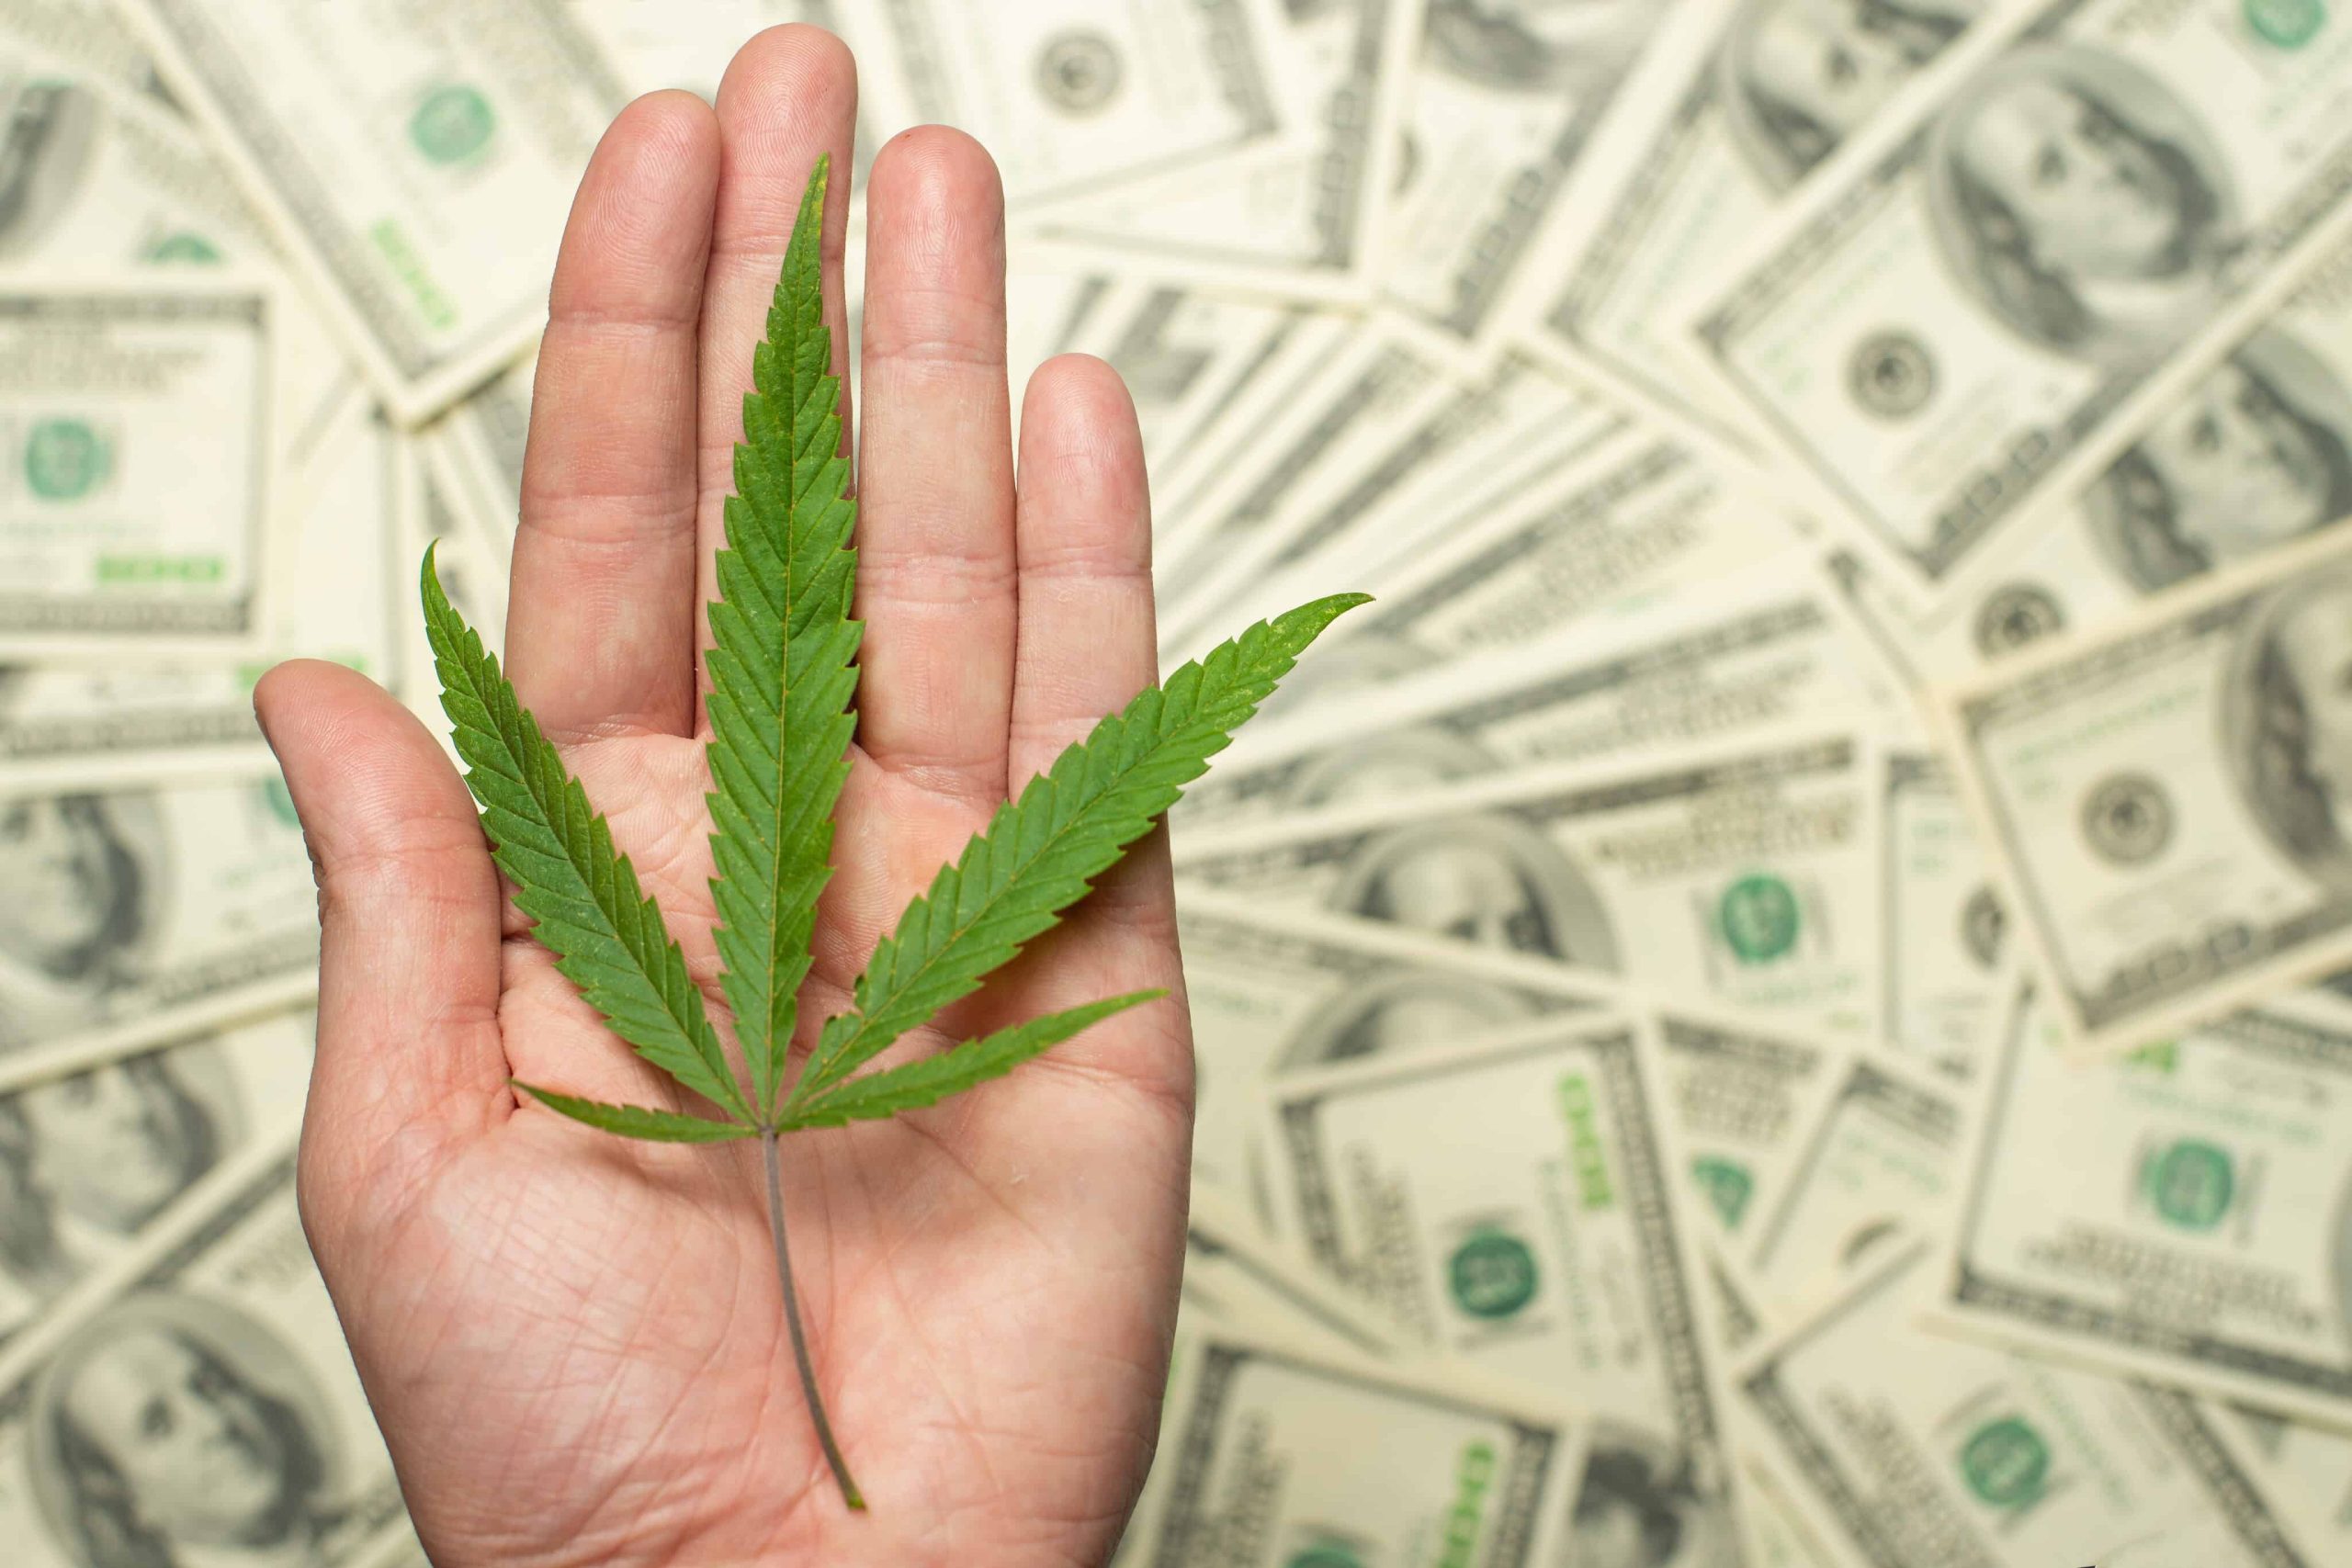 New York Town Owes Nearly $200,000 After Firing Medical Cannabis Patient